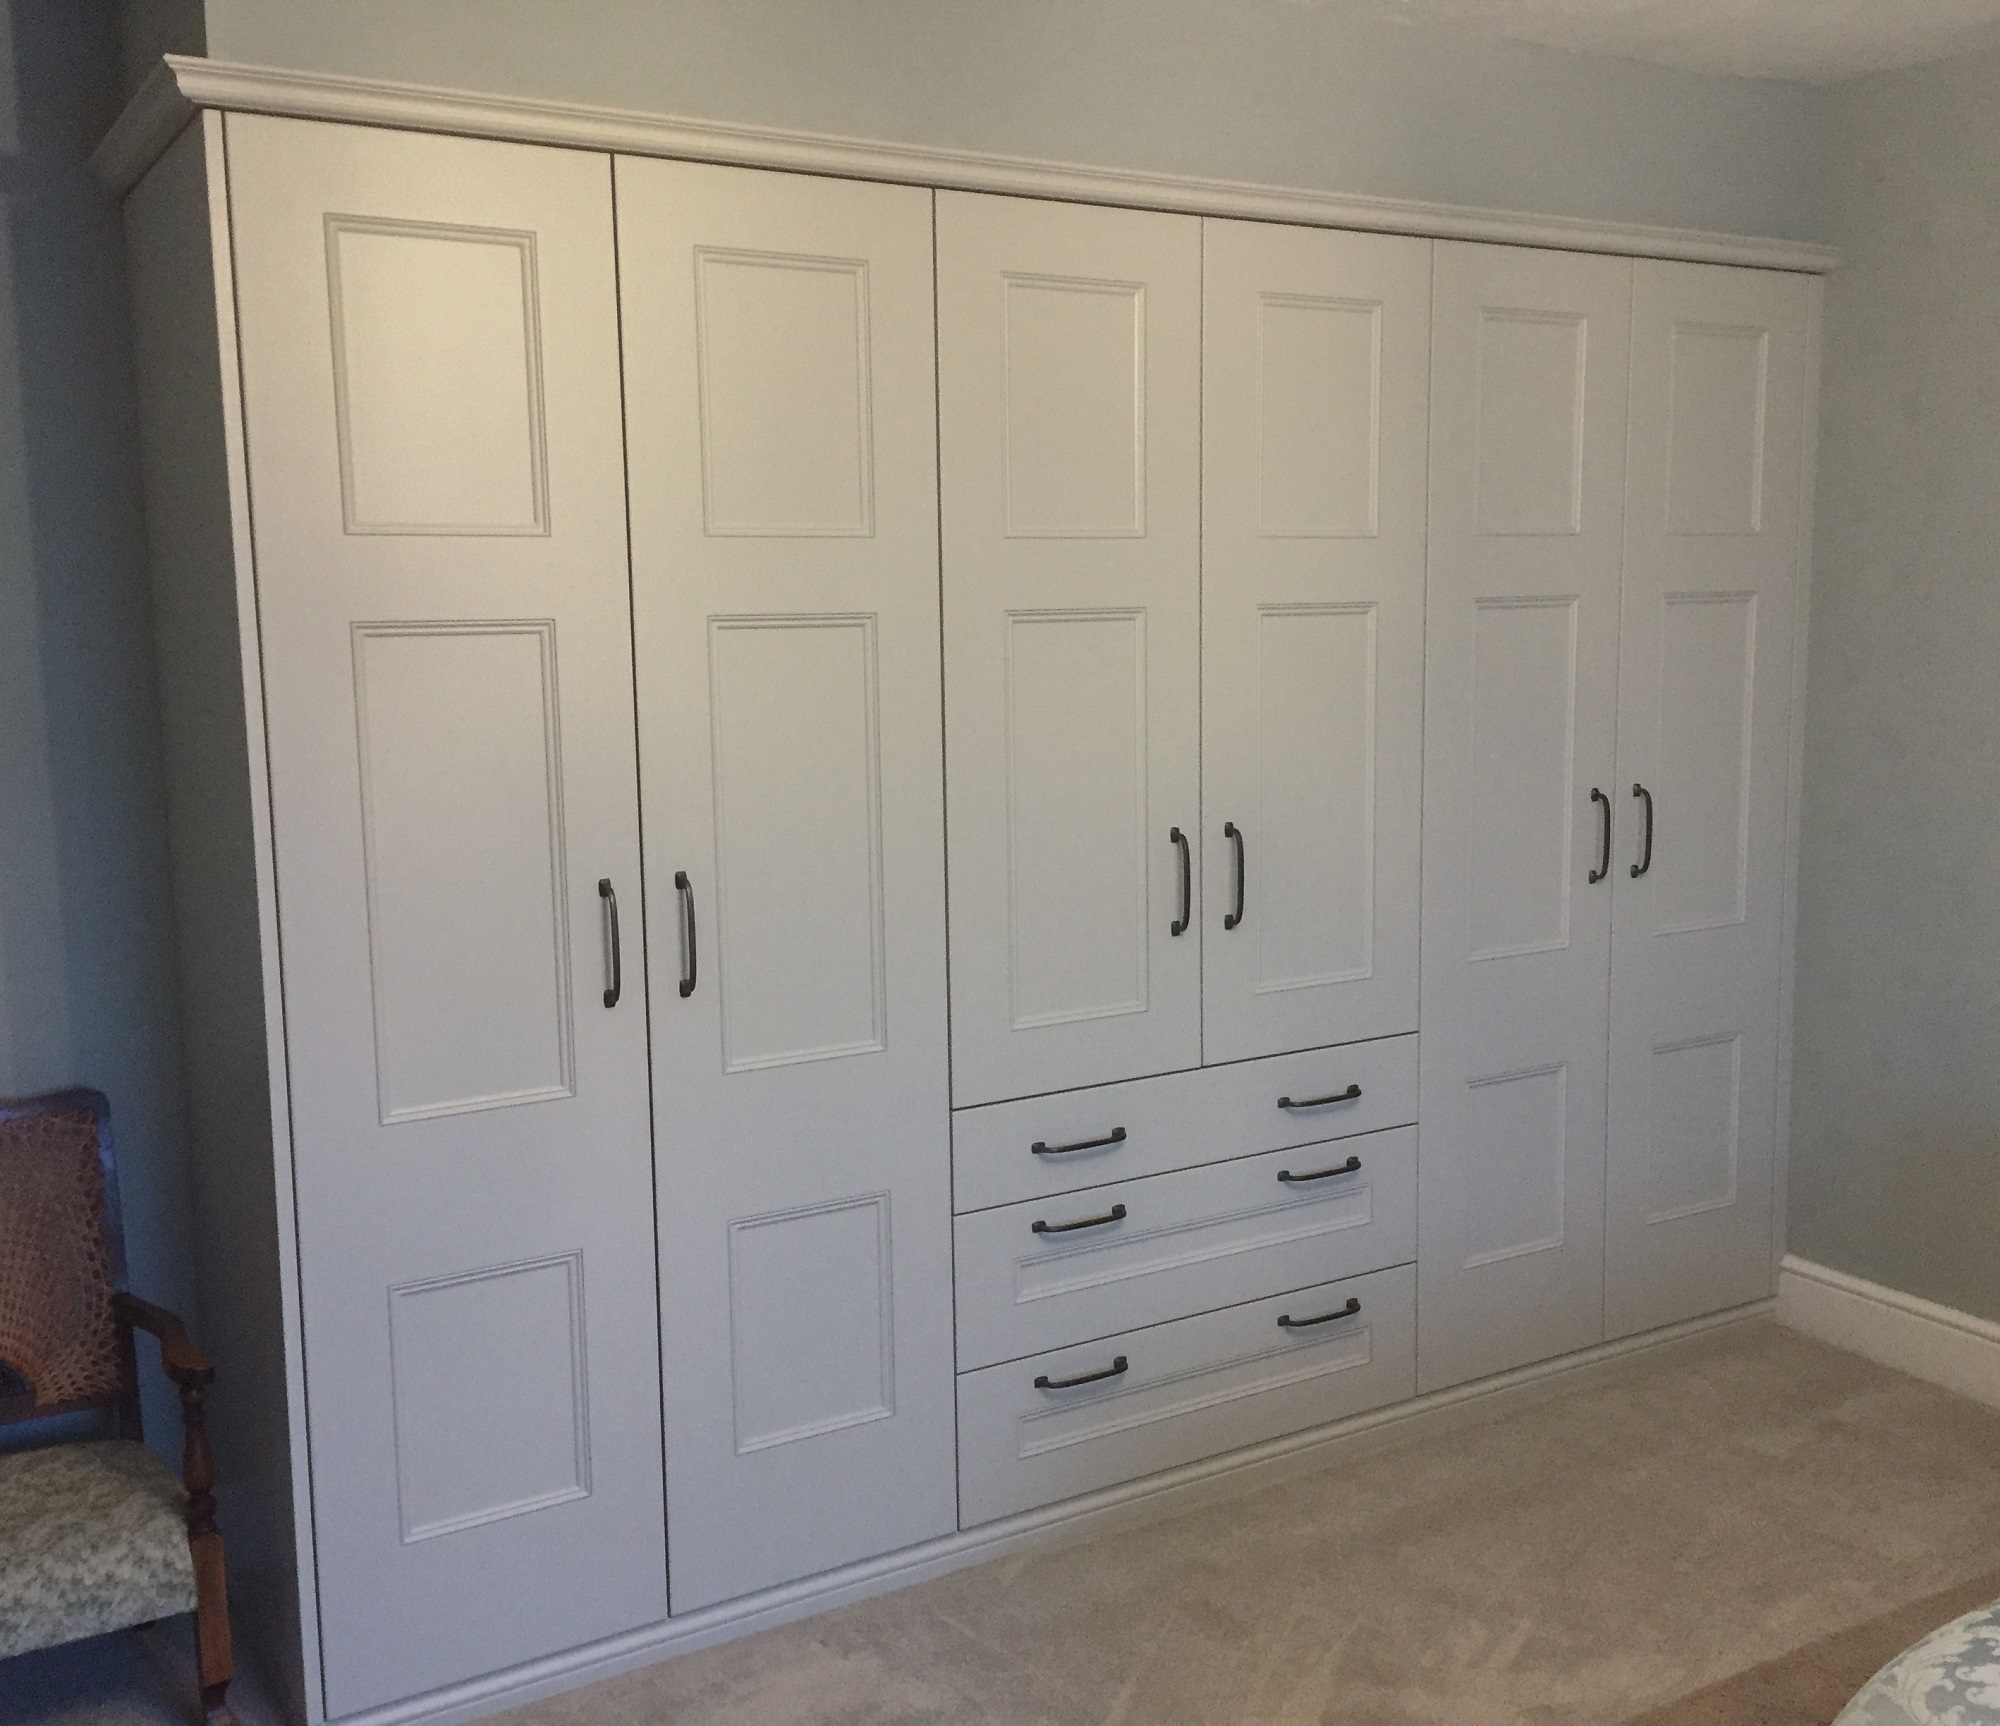 A Fitted wardrobe unit designed and built by us to the customers requirements